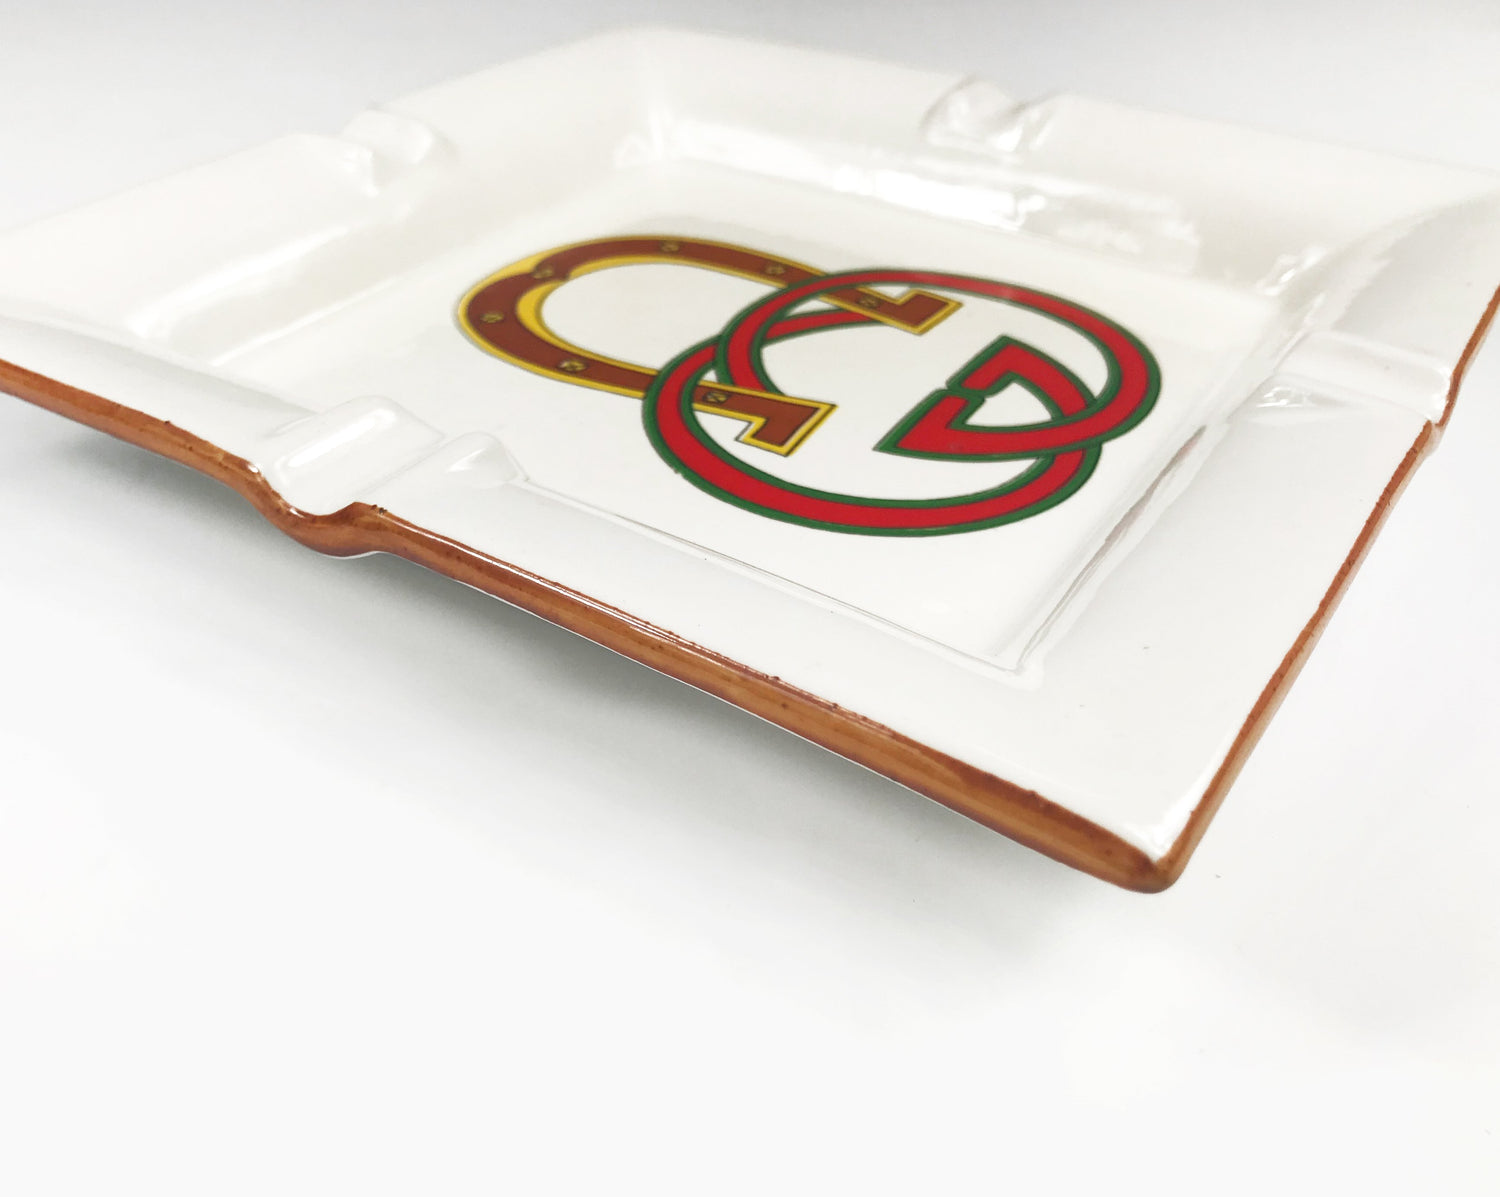 FRUIT Vintage Gucci hand painted 1980's porcelain logo ashtray or change tray. Features a classic ashtray shape, brown trim and Gucci suede logo fabric and mark at base. This is a very special piece!